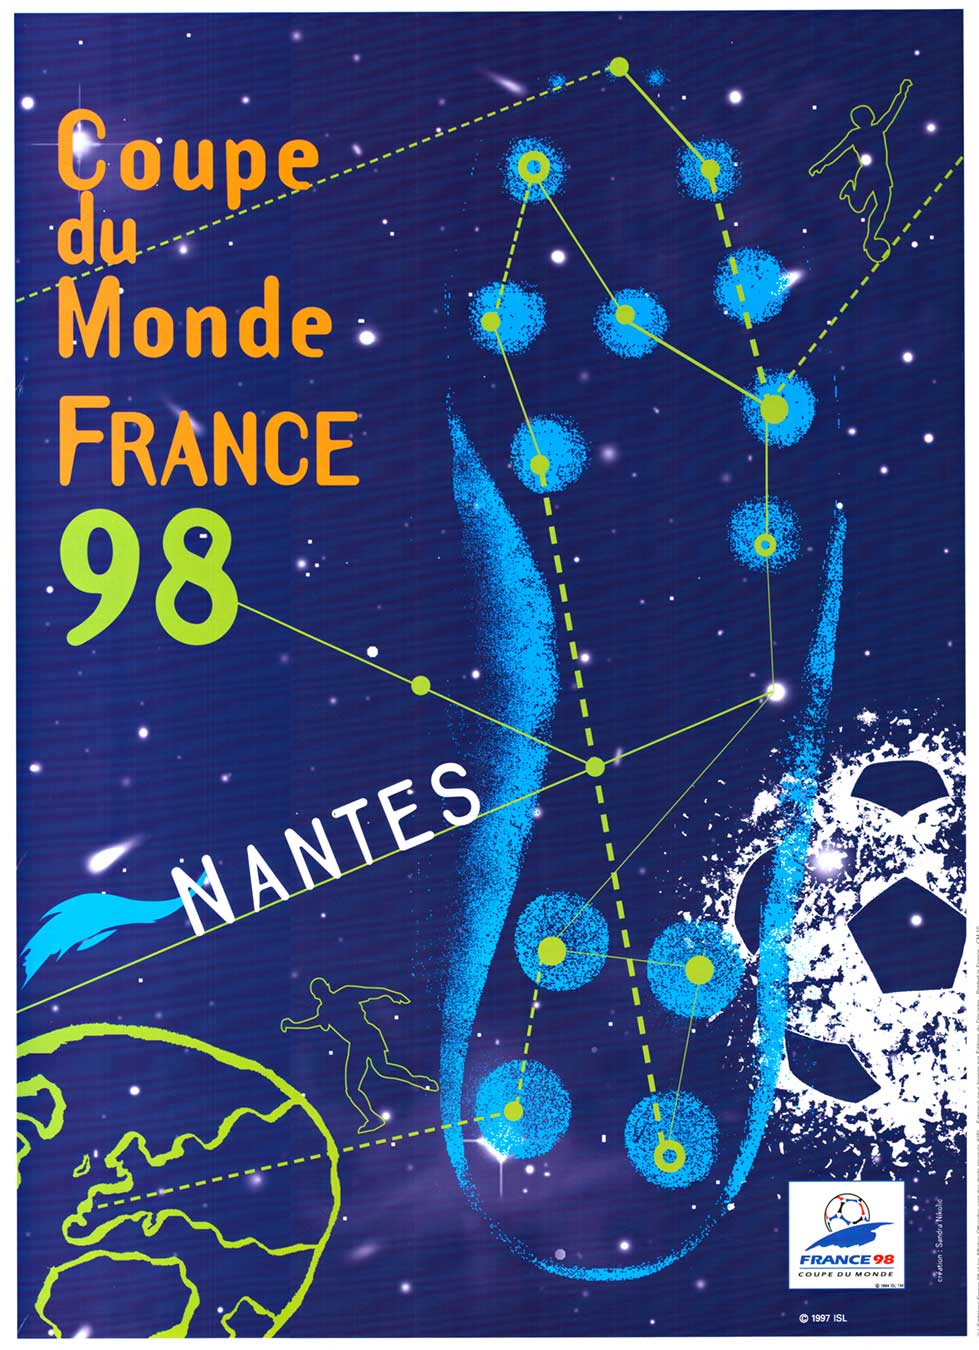 Original Coupe du Monde France 98 Nantes, World Cup soccer poster. <br>Linen backed in excellent condition, ready to frame. There is no damage, no restoration, and great colors. A World Cup poster was printed for each city in 1998, where one or more 